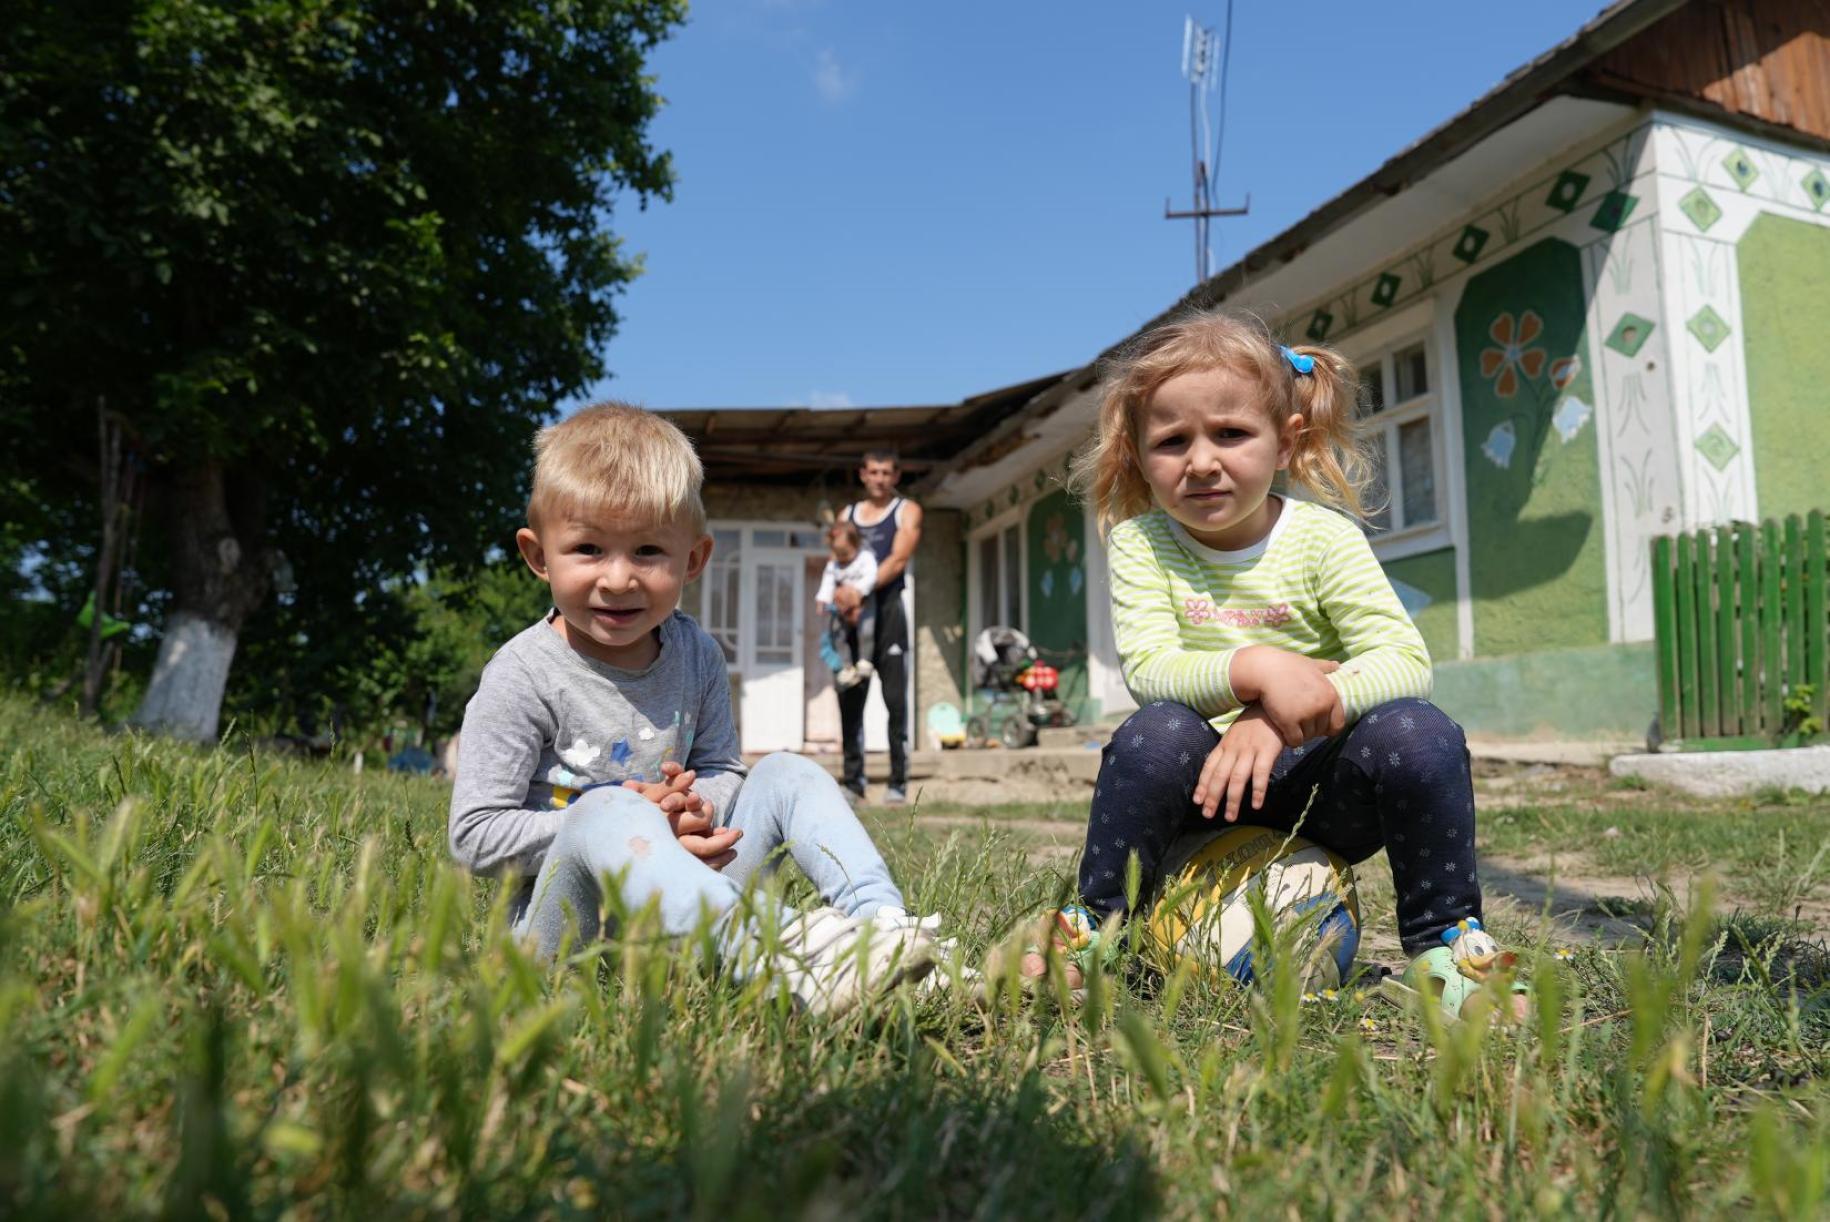 Two children sit on grass in front of a house and smile.